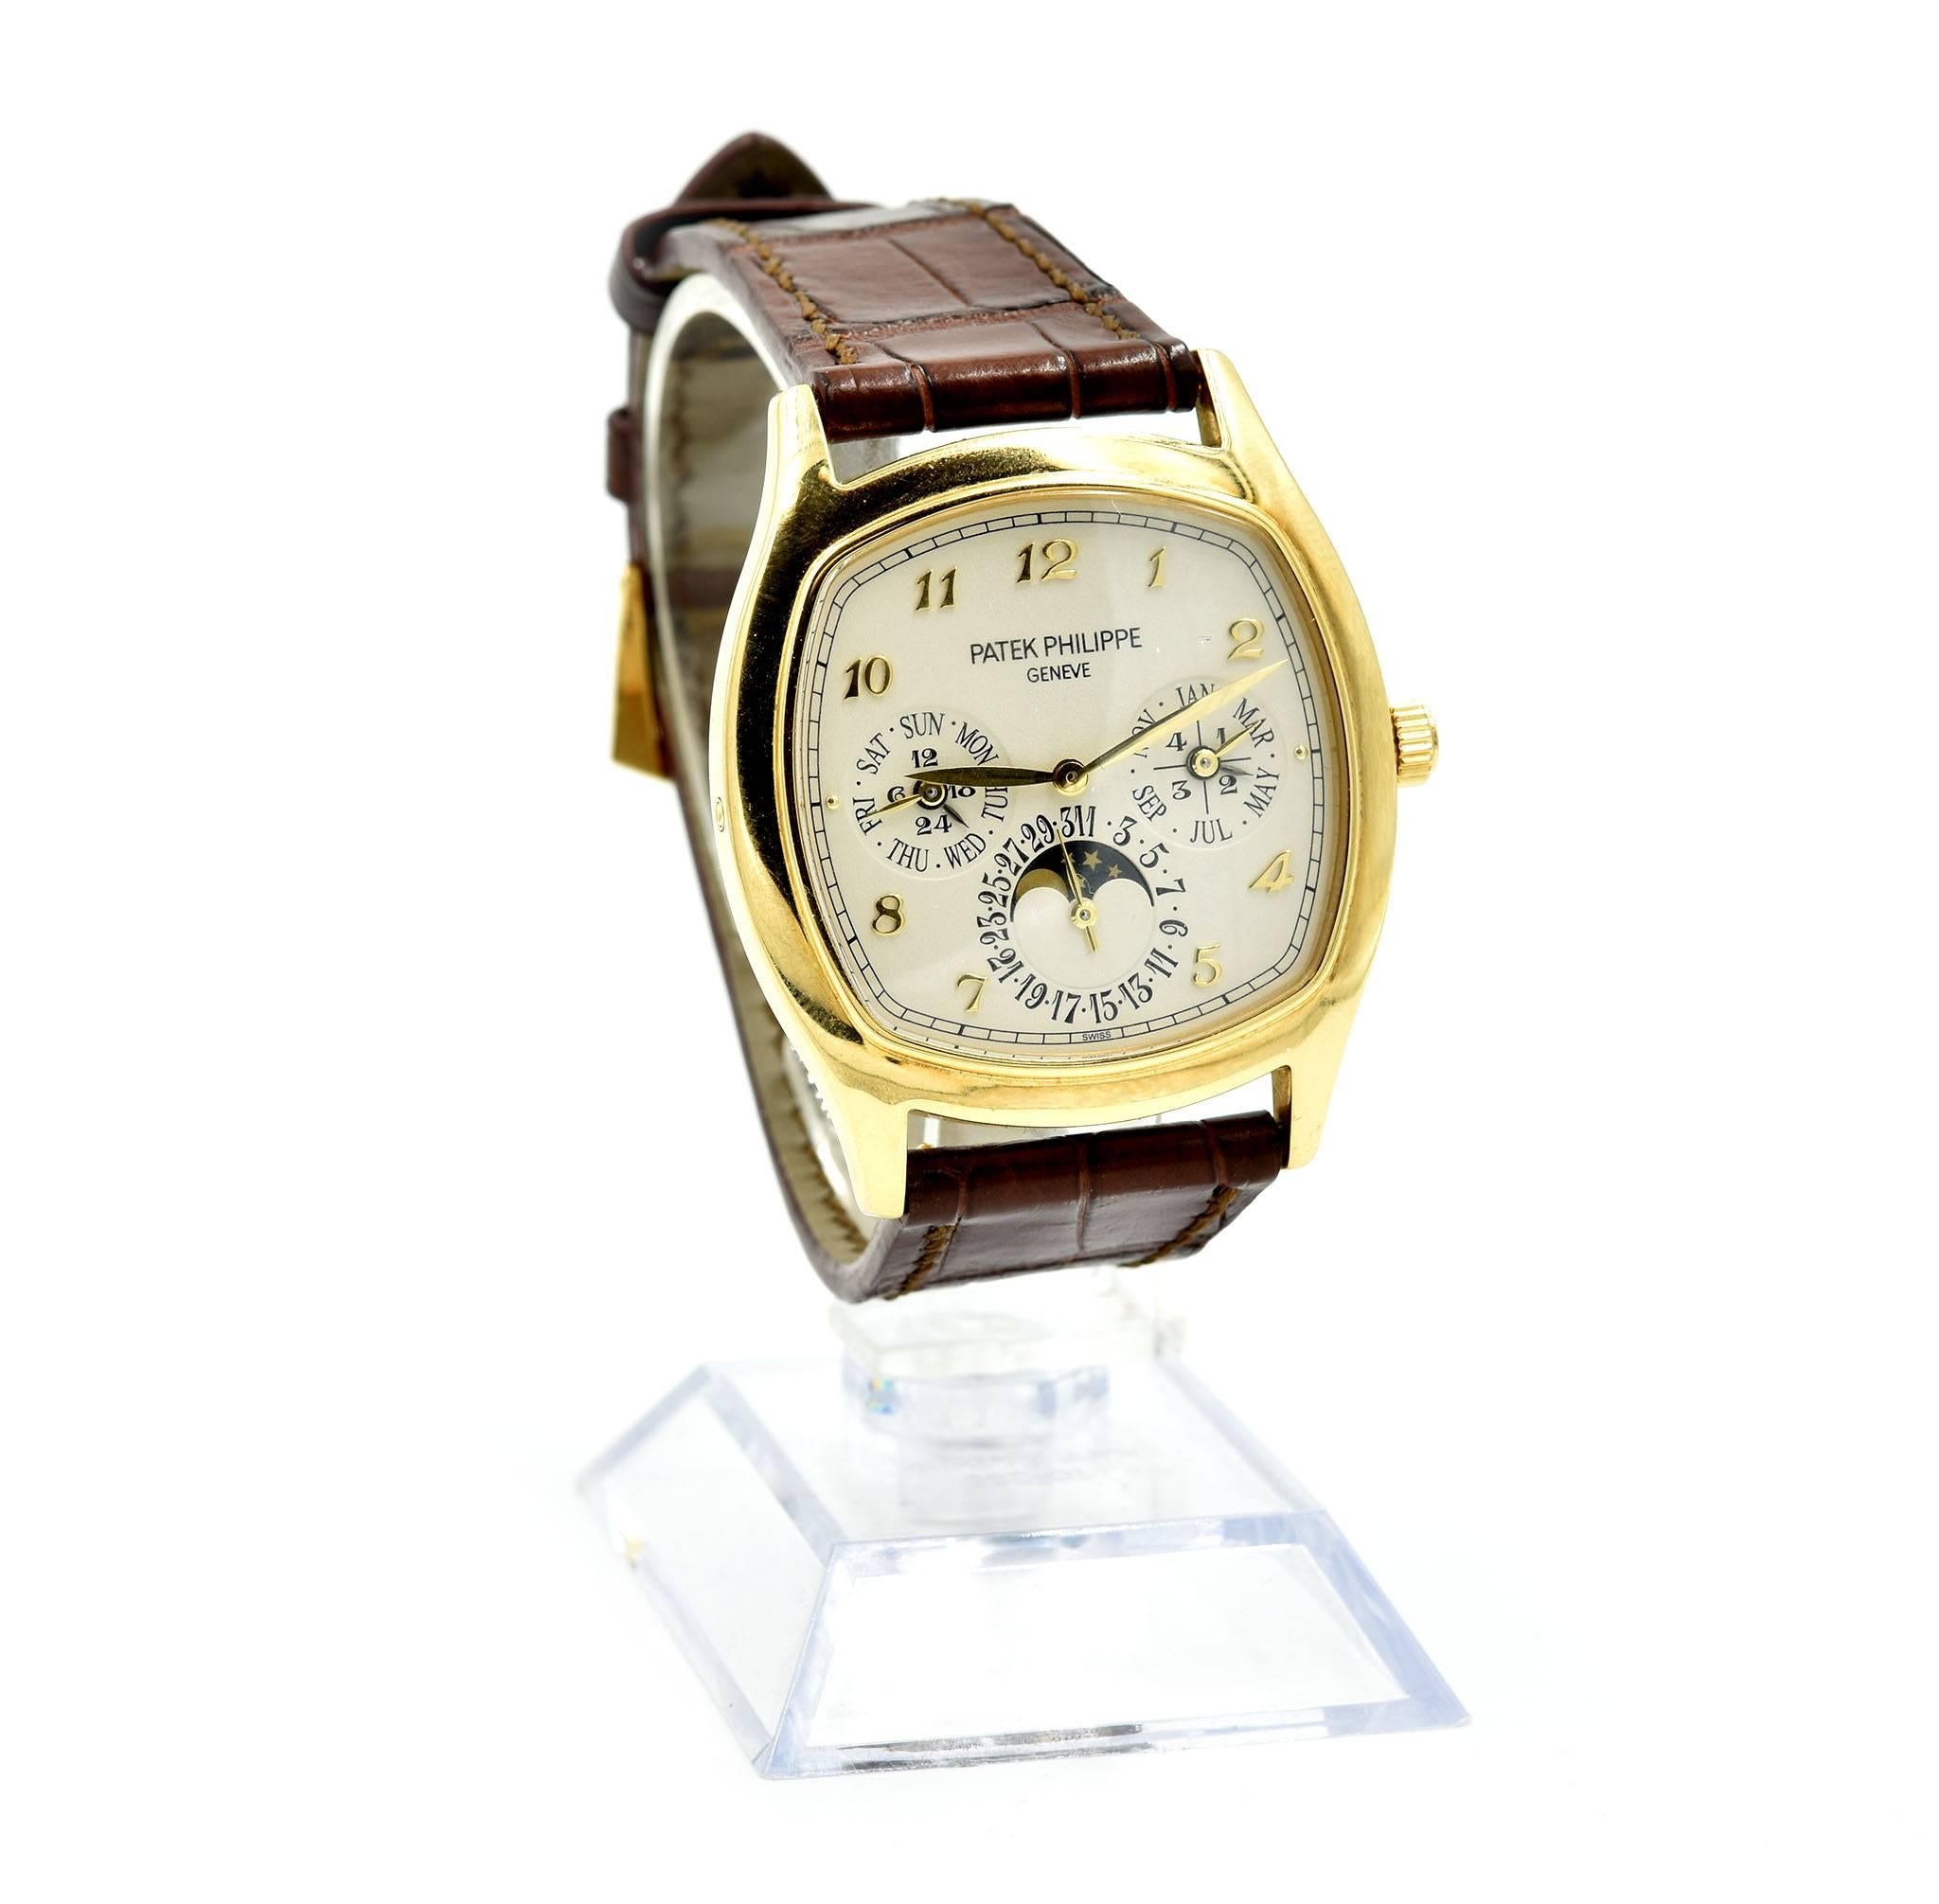 Movement: automatic Patek Philippe caliber 240 Q movement
Function: leap year, month, date, day, hour, minute, second, moonphase, GMT, perpetual calendar, grand complication
Case: tonneau shape 37.00mm x 44.60mm 18k yellow gold ultra-thin case,